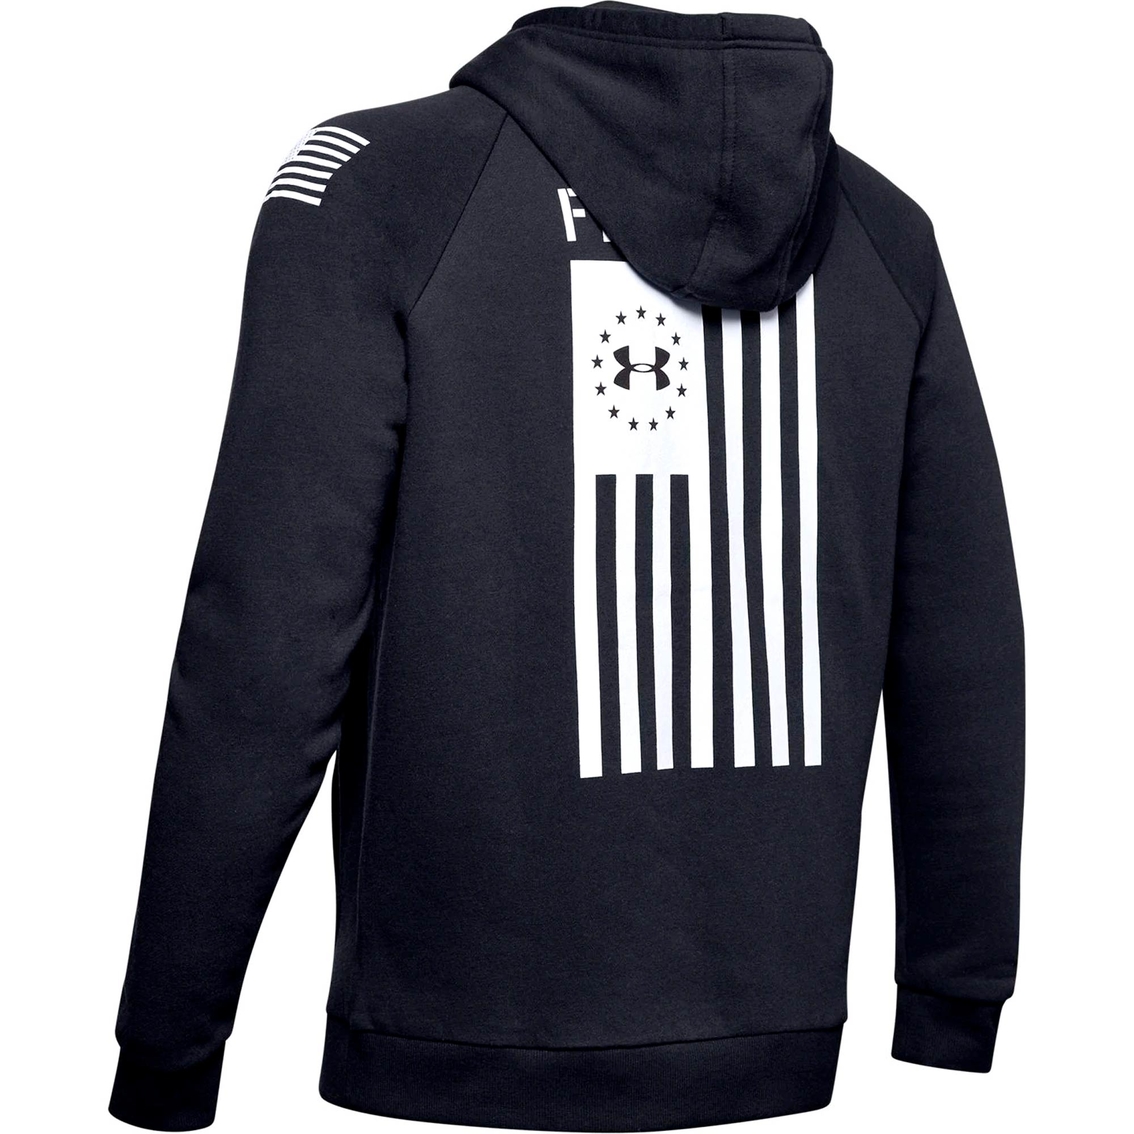 Freedom Flag Rival PO Hoodie - Image 5 of 6